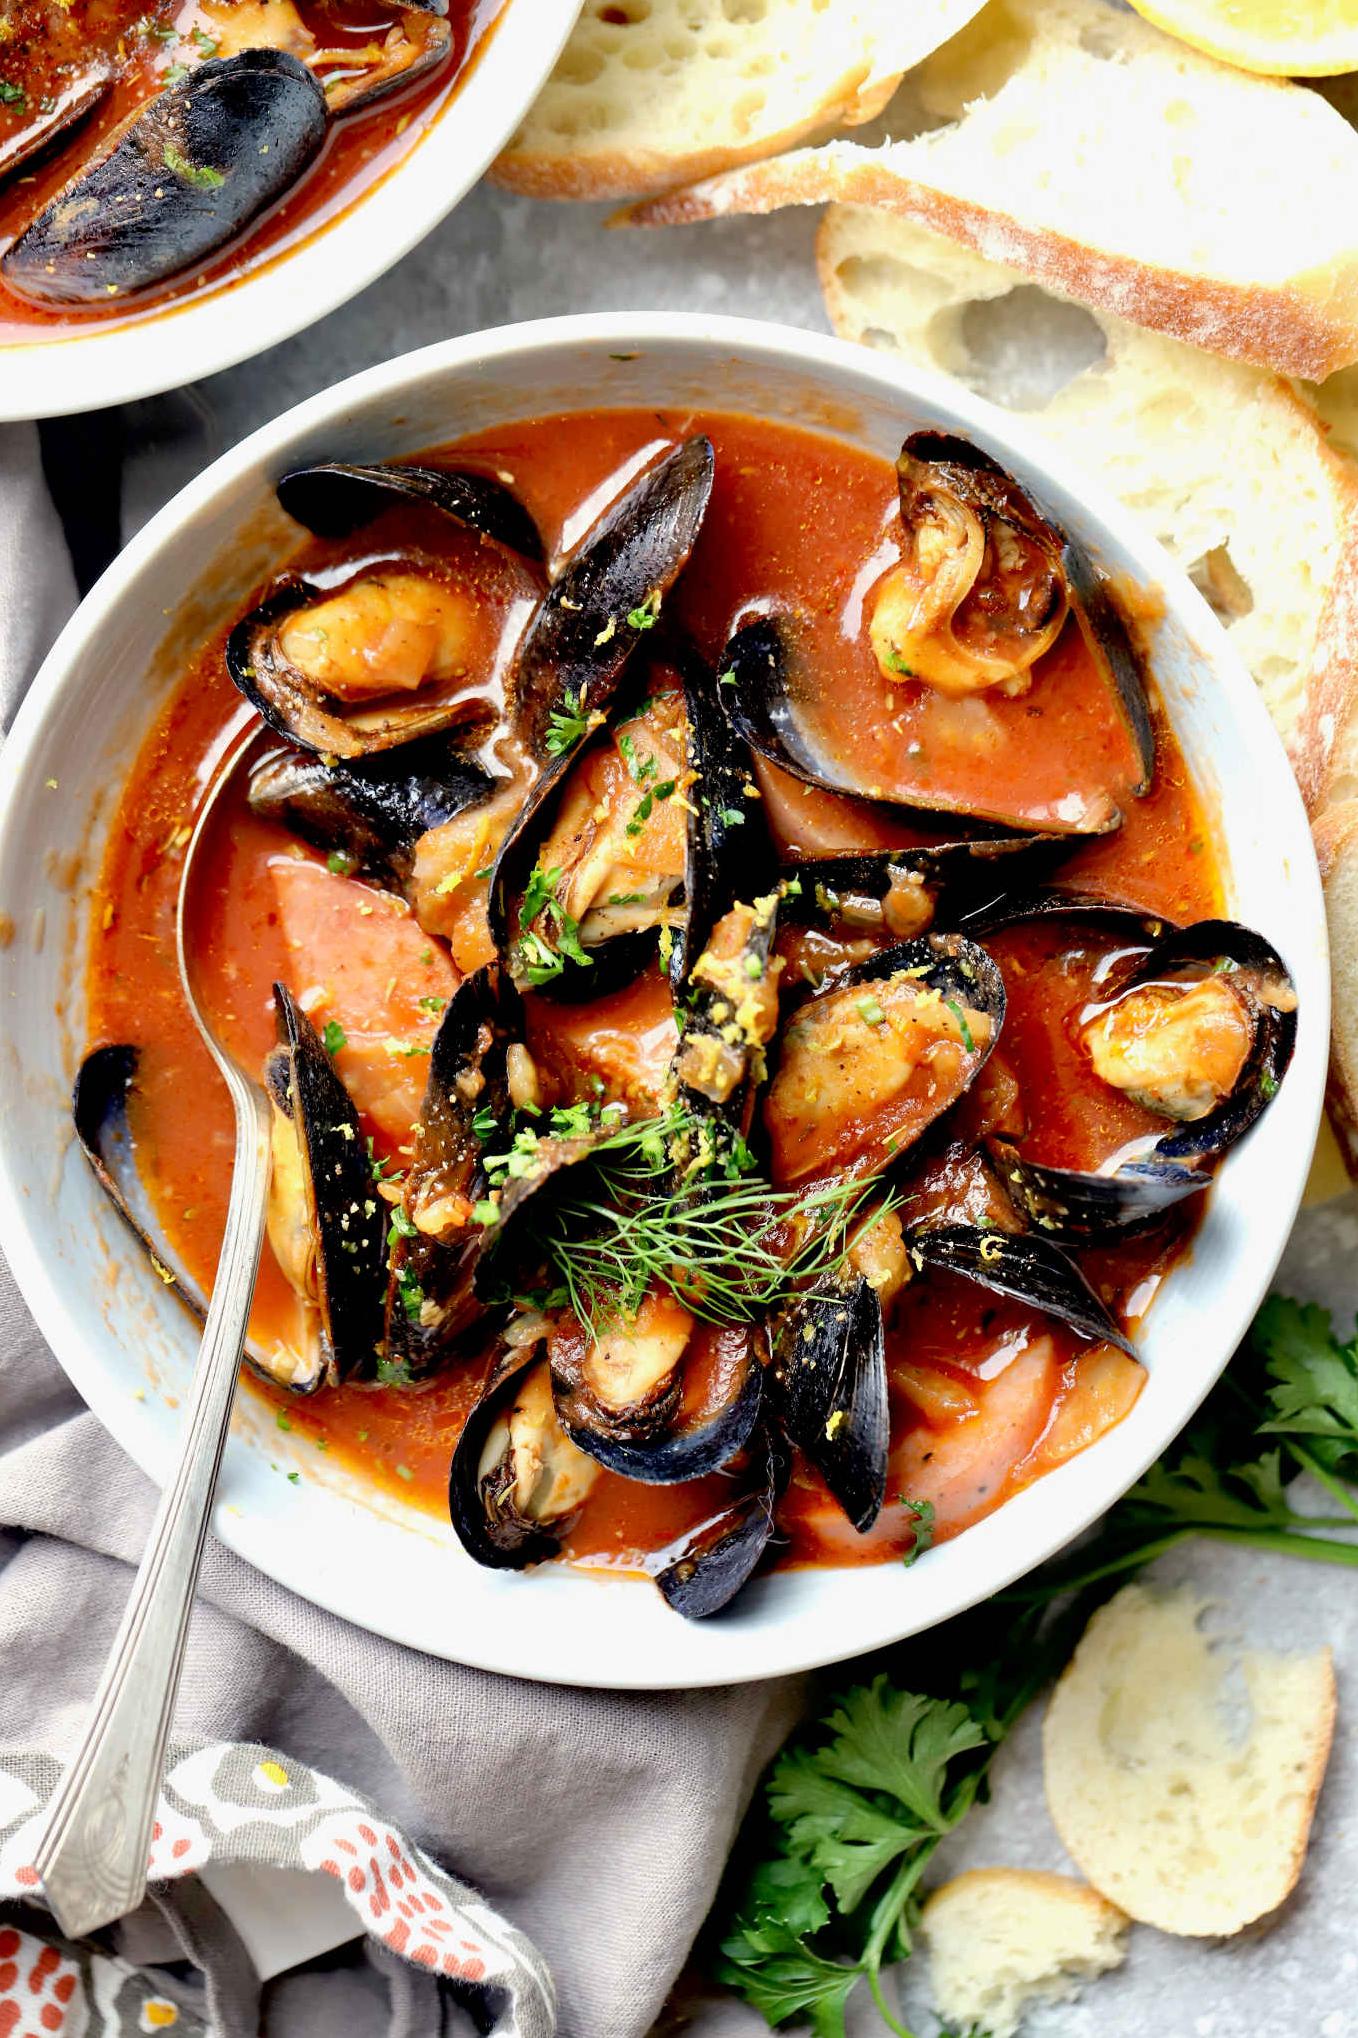  Love at first bite! These mussels will steal your heart in no time.